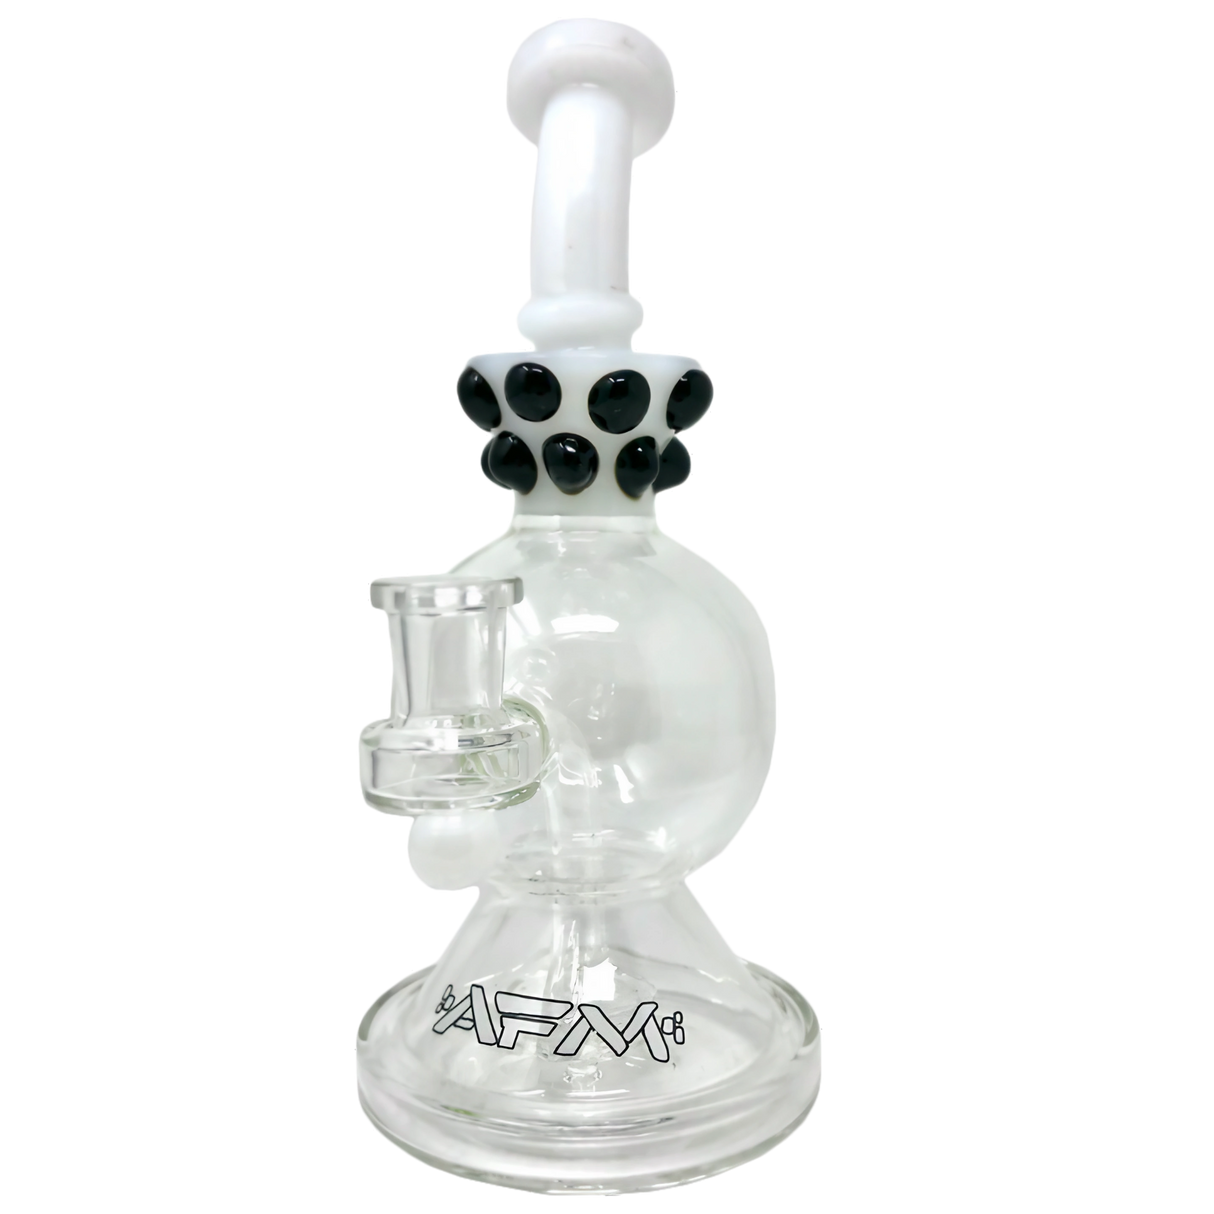 AFM Glass - The Crown Rig 9" with Showerhead Percolator and Banger Hanger - Front View